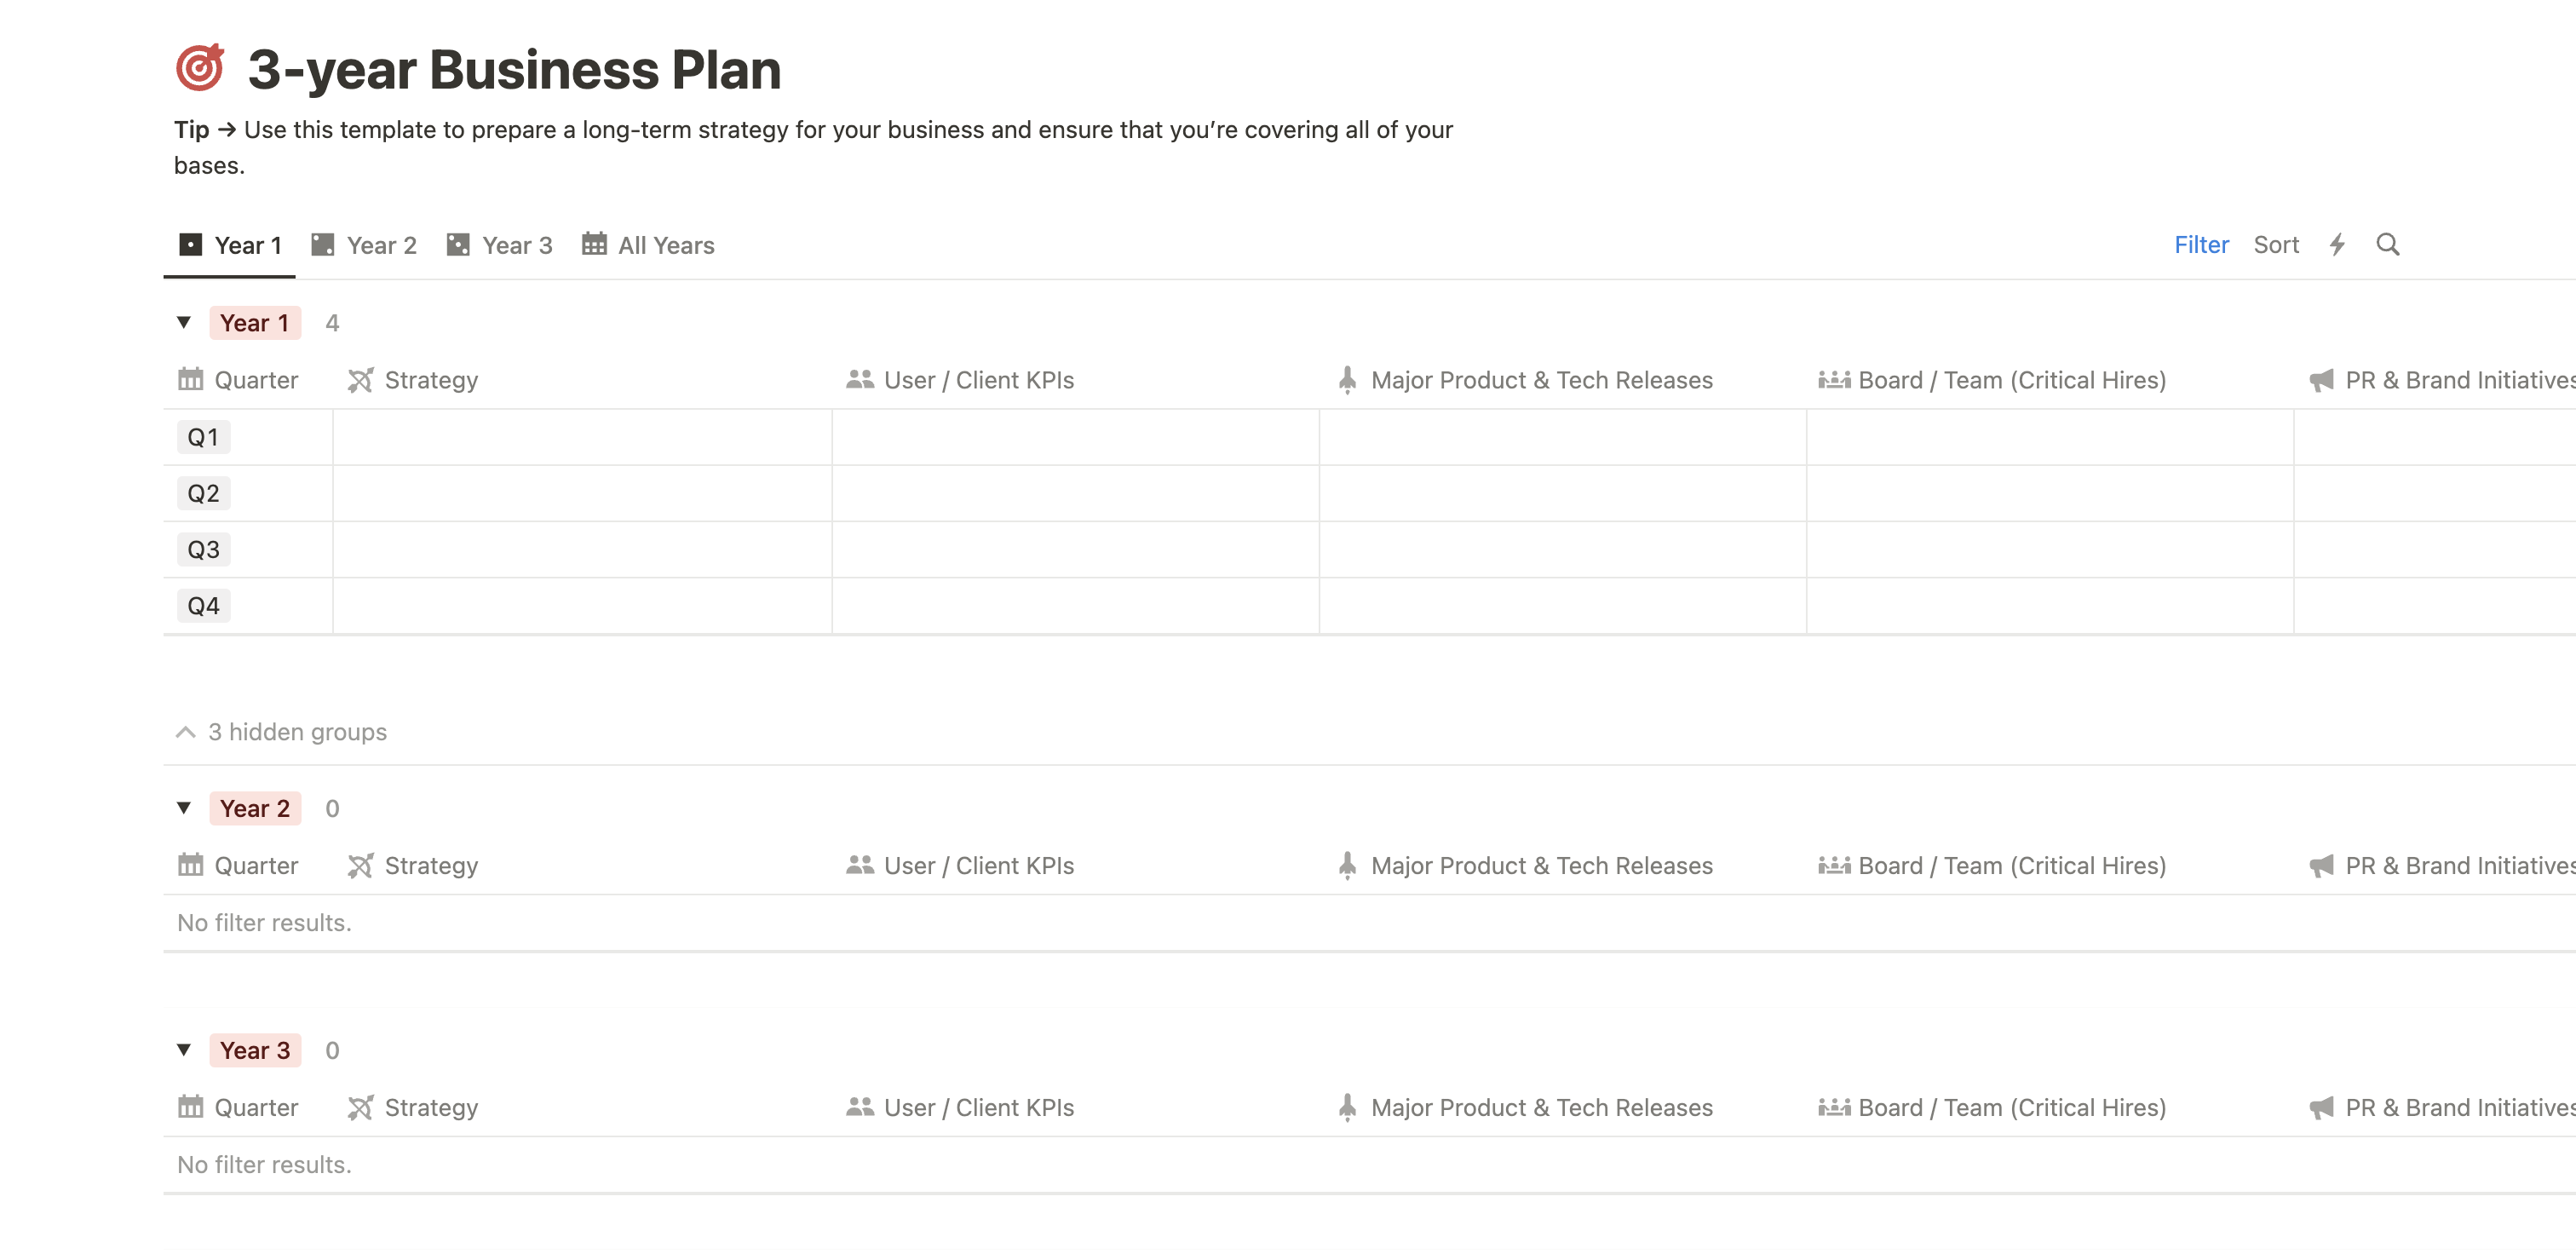 3-year Business Plan template